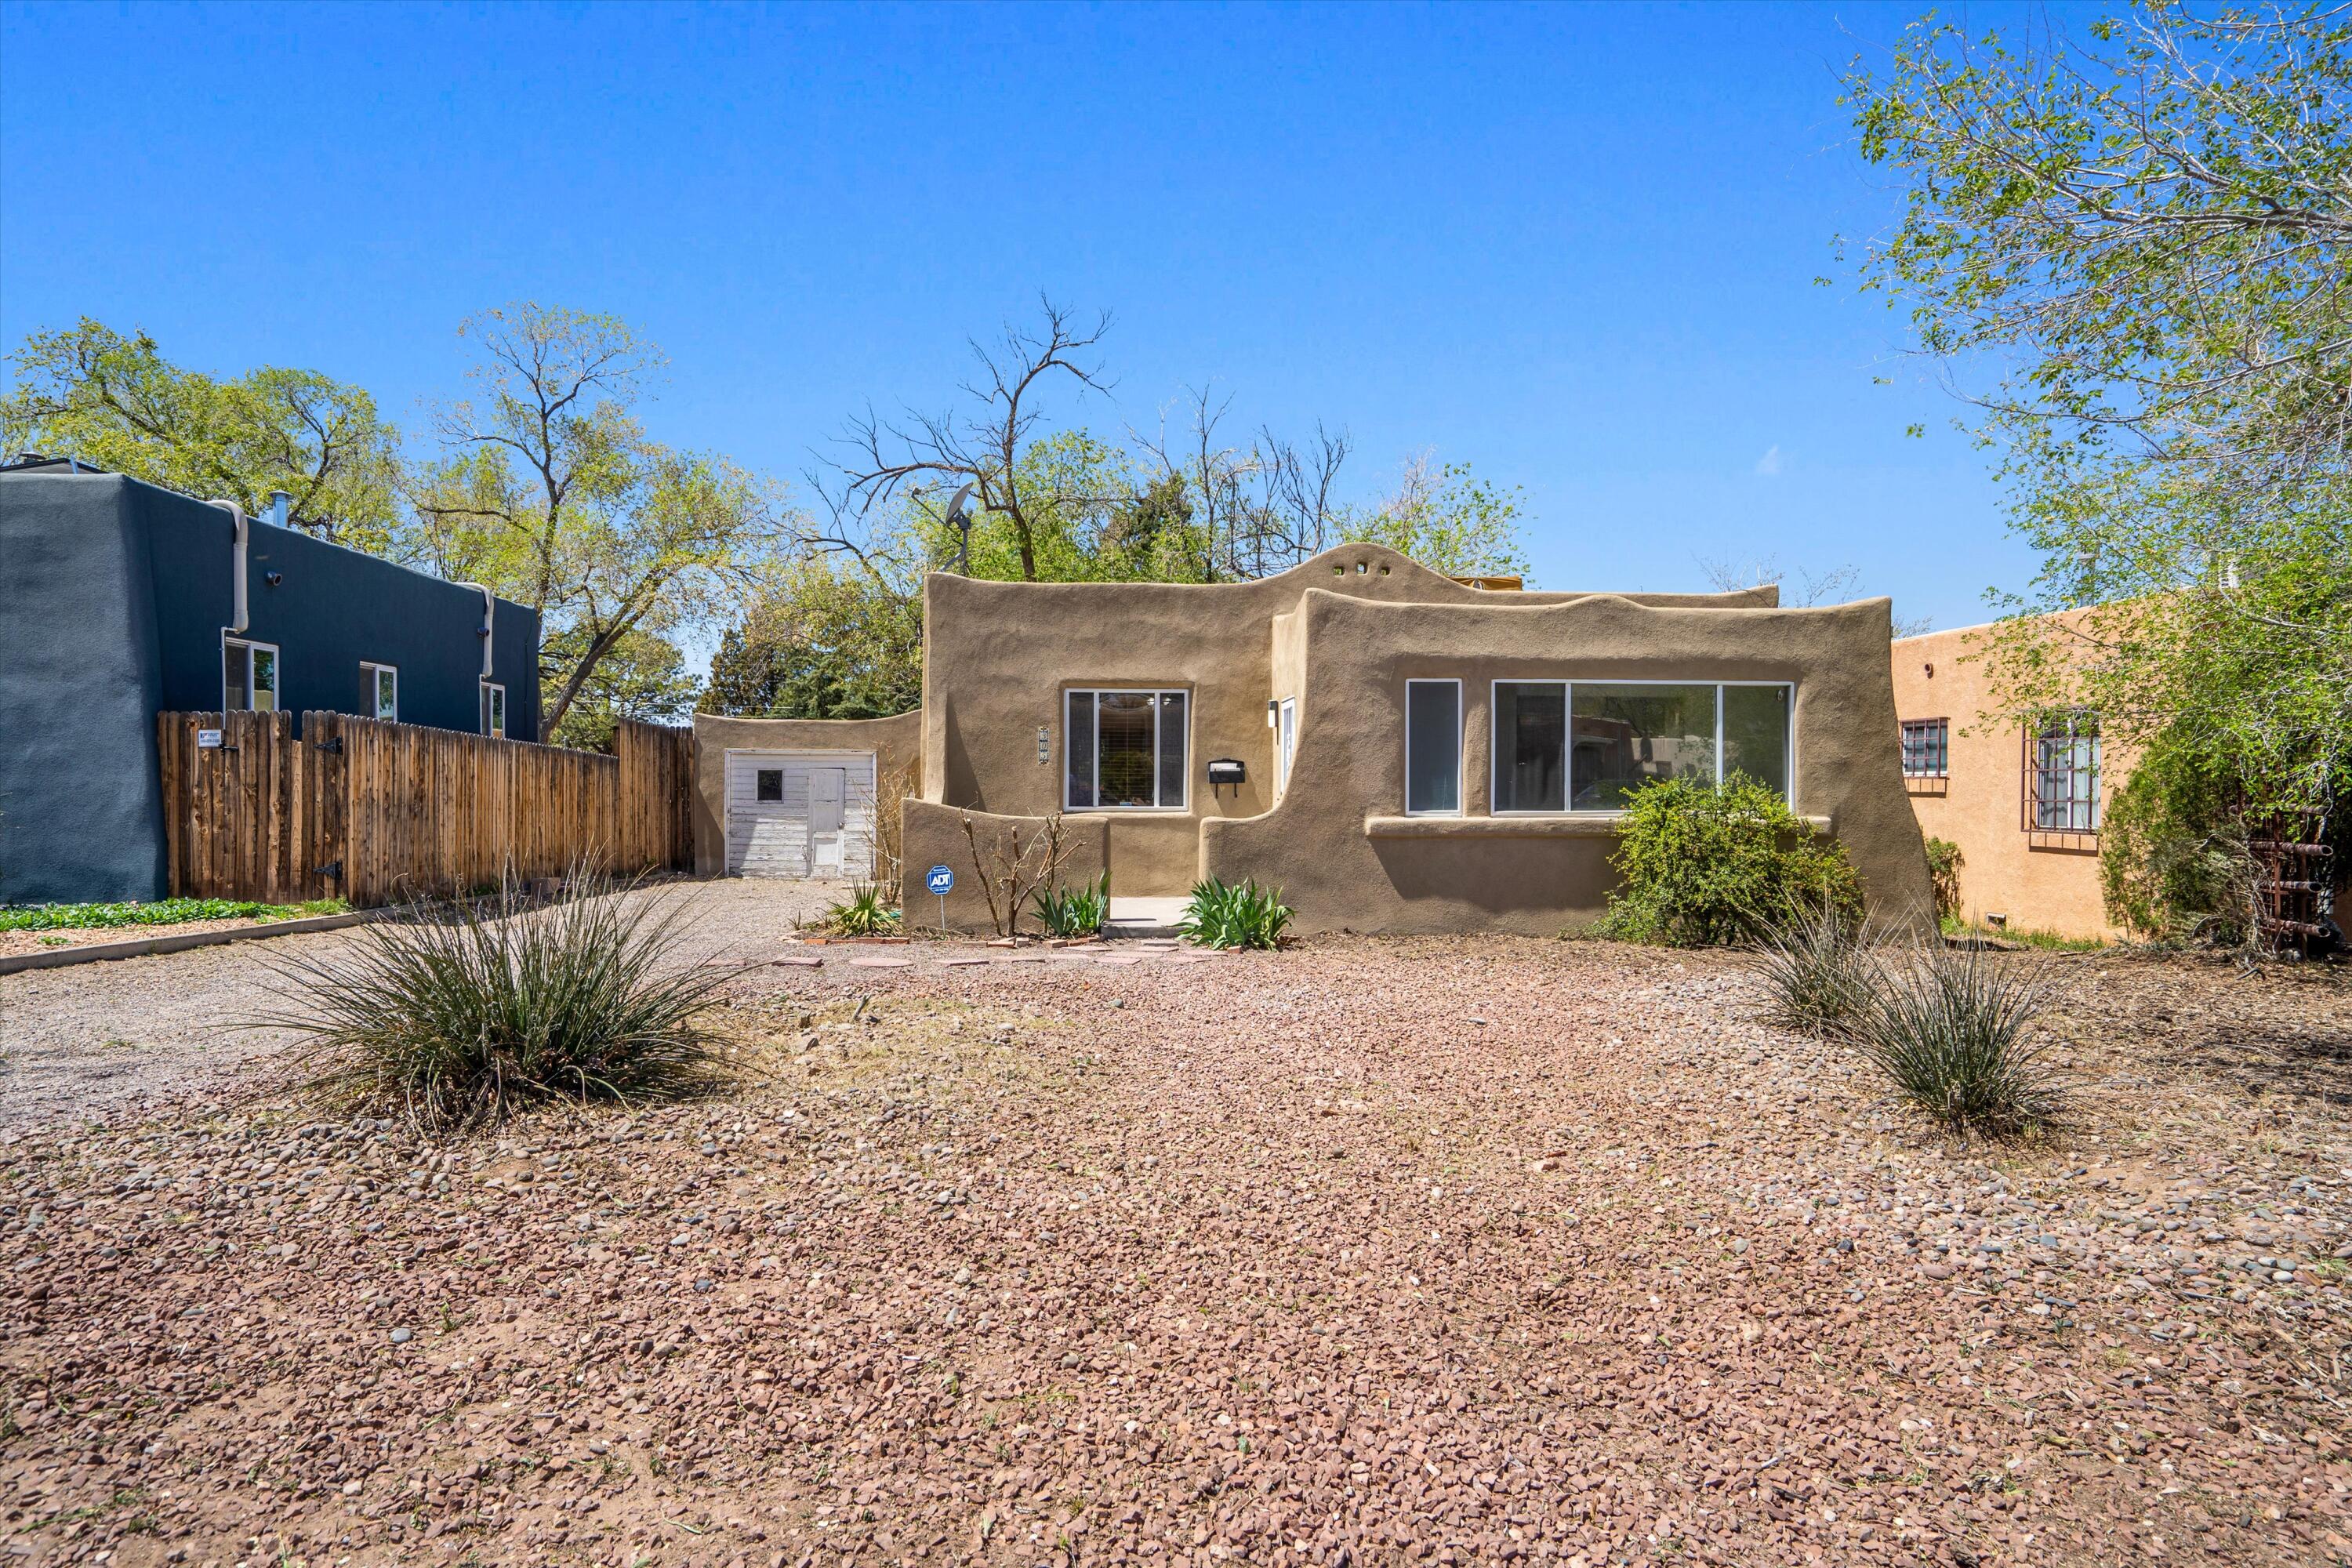 Welcome home to this beautiful Knob Hill / UNM area home!  Featuring, new stucco, hardwood floors, fresh paint, fireplace, gas stove, two living areas, ceiling fans, one car garage and large yard!